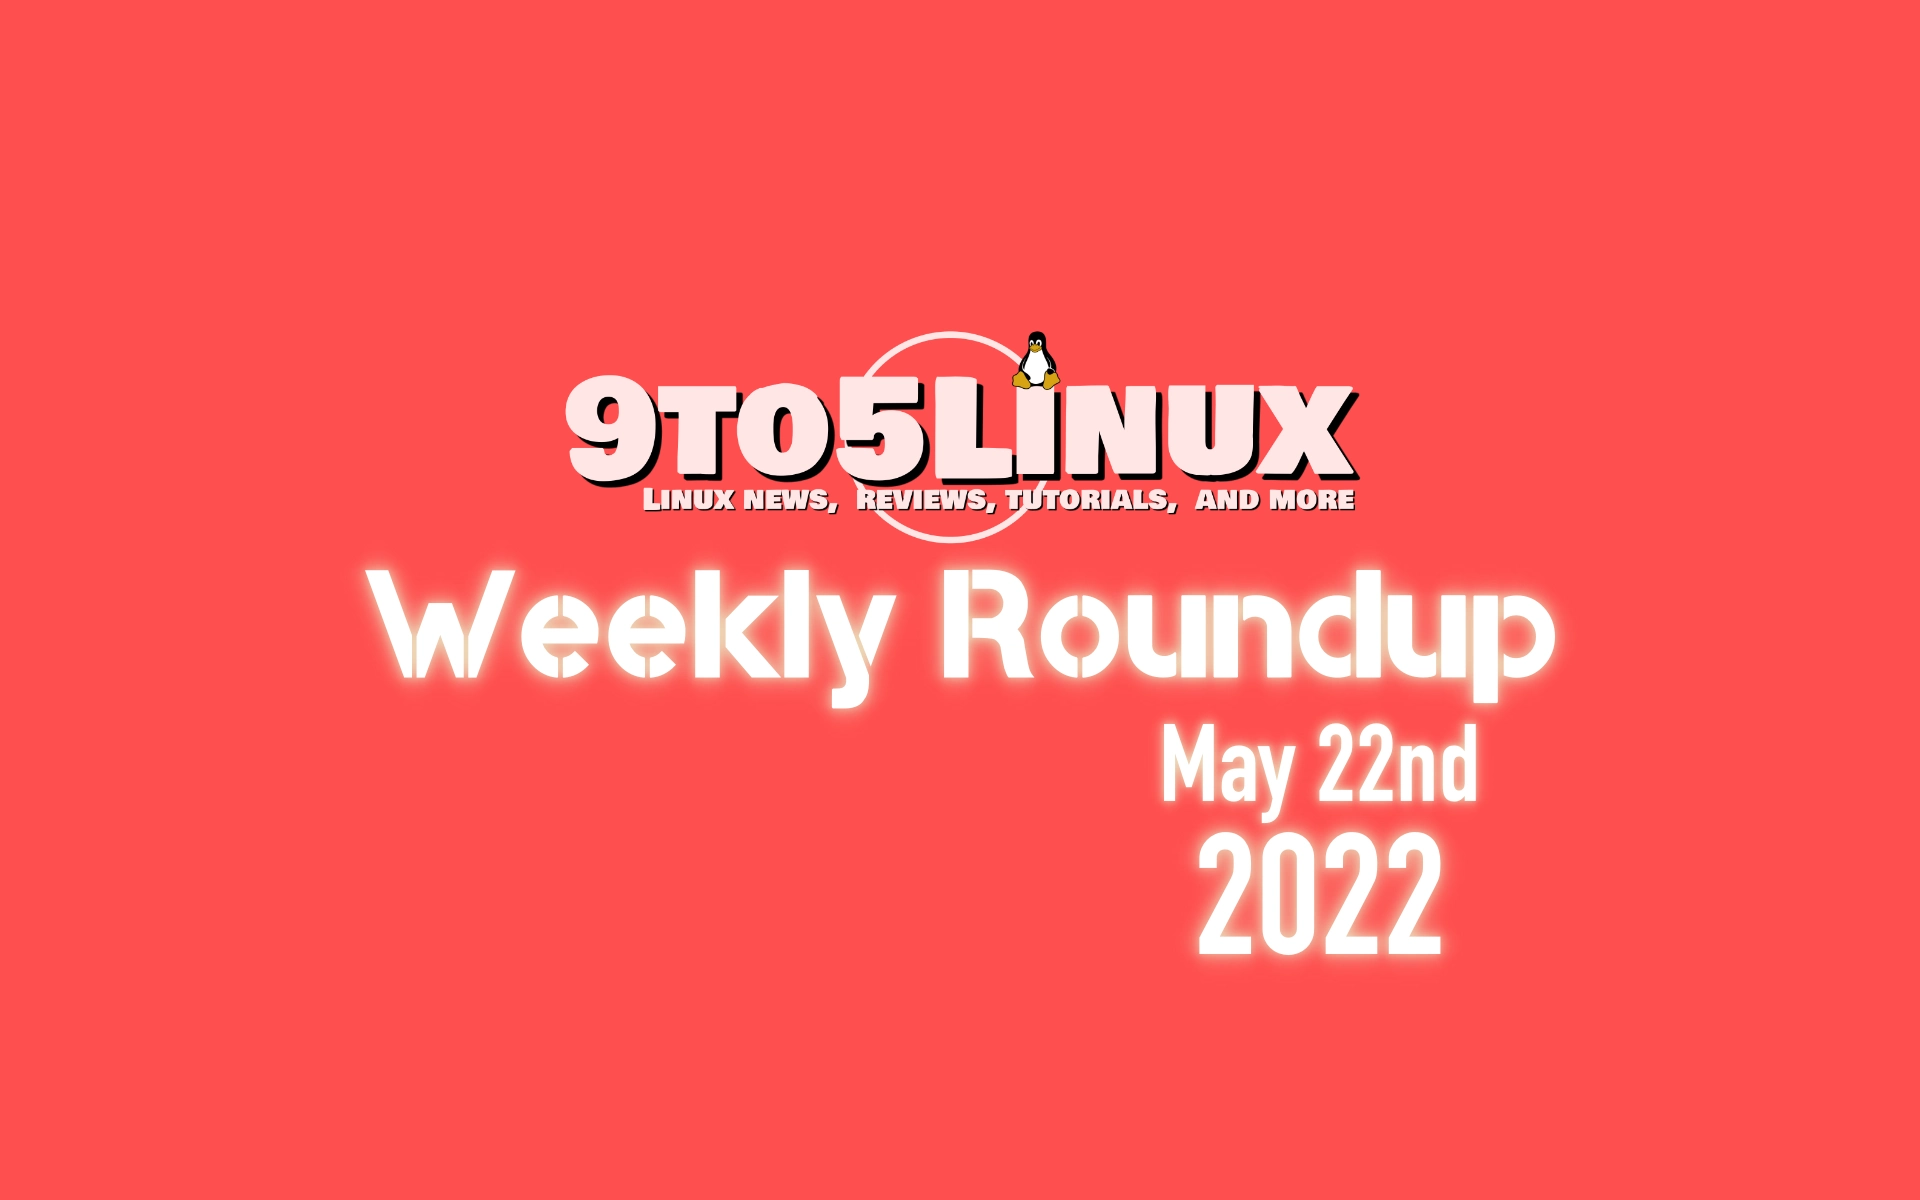 9to5Linux Weekly Roundup: May 22nd, 2022